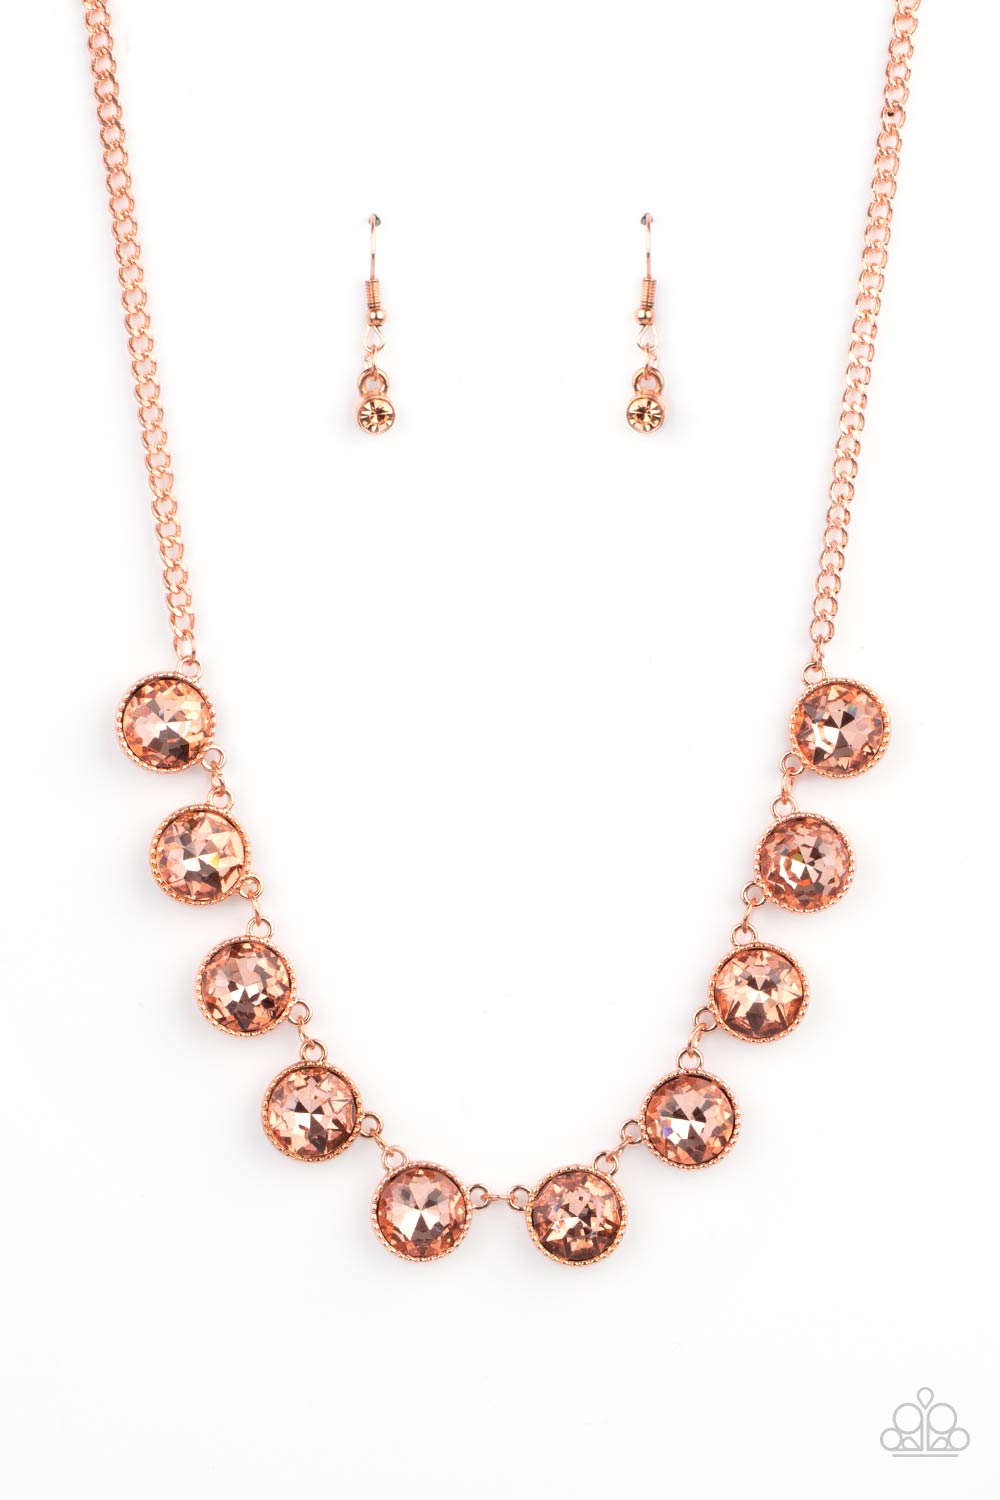 Mystical Majesty Copper Necklace - Paparazzi Accessories  Featuring a mystical iridescence, a sparkling display of round cut coppery gems are encased in delicately textured copper frames as they link below the collar, creating a majestic statement piece. Features an adjustable clasp closure.  All Paparazzi Accessories are lead free and nickel free!  Sold as one individual necklace. Includes one pair of matching earrings.